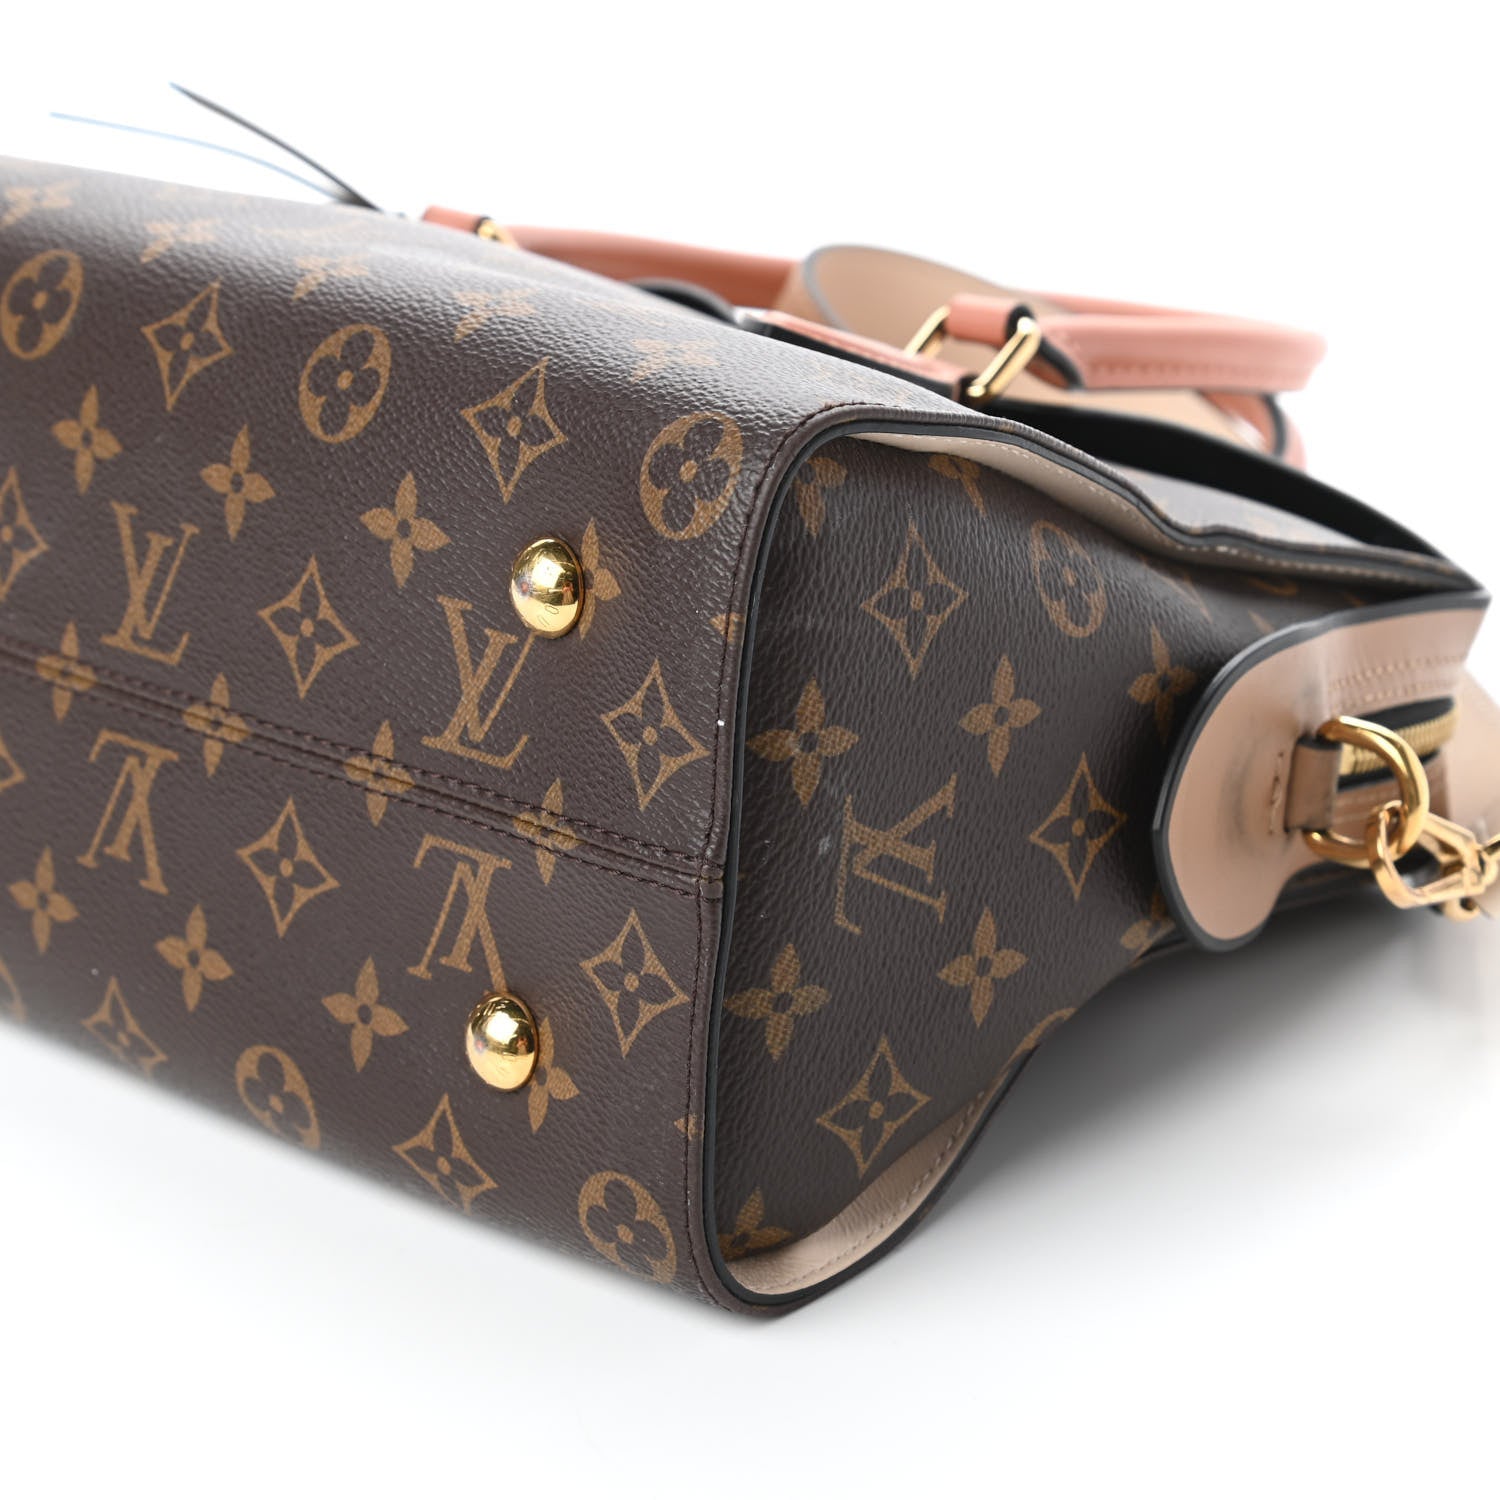 Tuileries Leather Shoulder Bag (Authentic Pre-Owned)  Shoulder bag,  Leather shoulder bag, Louis vuitton bag neverfull